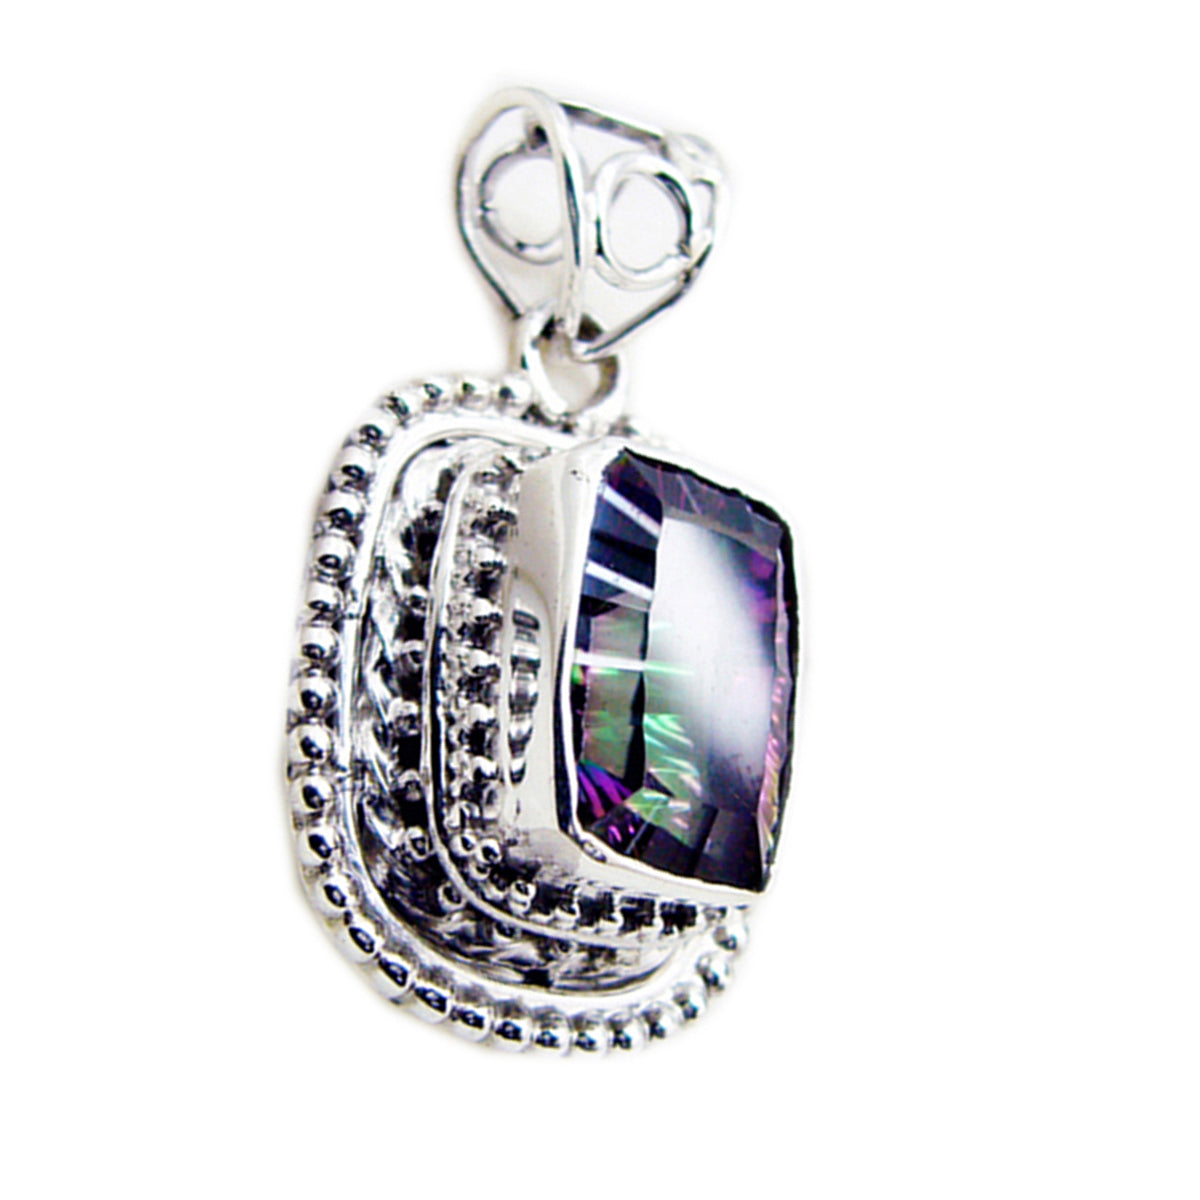 Riyo Pleasing Gems Octagon Faceted Multi Color Mystic Quartz Silver Pendant Gift For Boxing Day